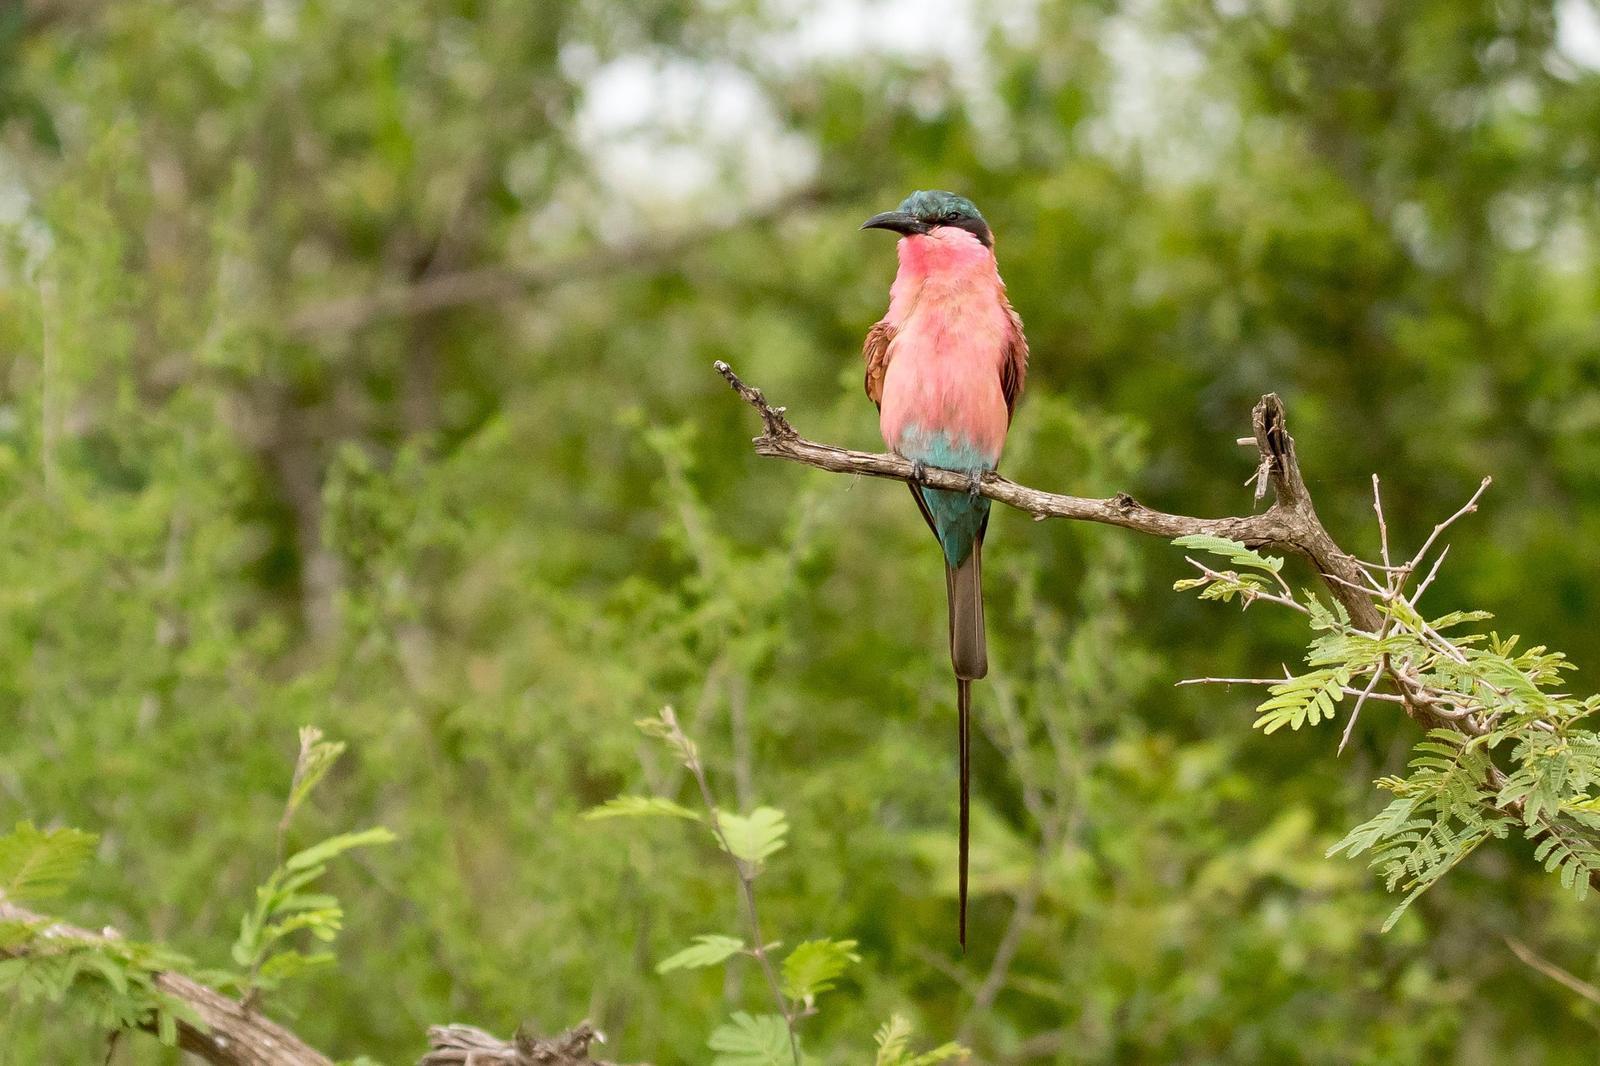 Southern Carmine Bee-eater Photo by Gerald Hoekstra